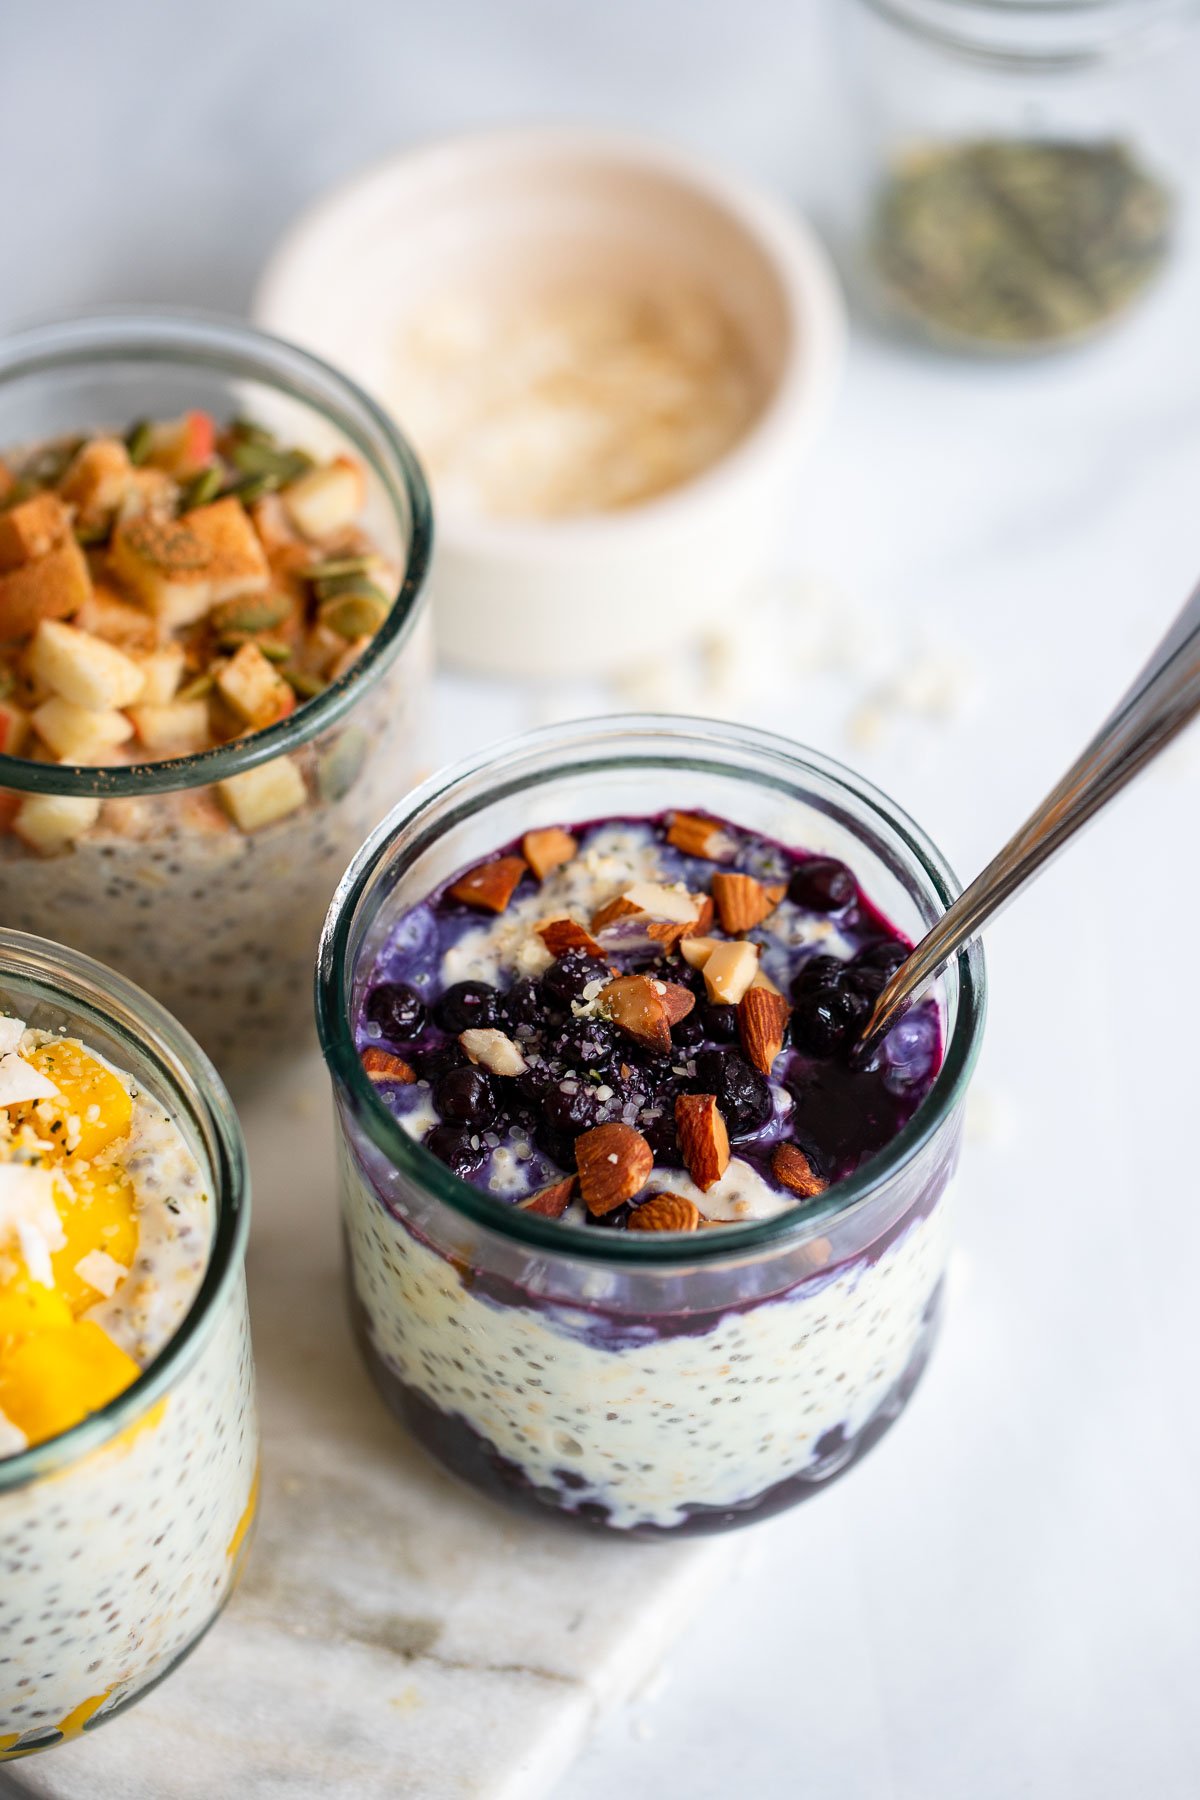 blueberry overnight oats topped with chopped almonds in a glass jar with a spoon.